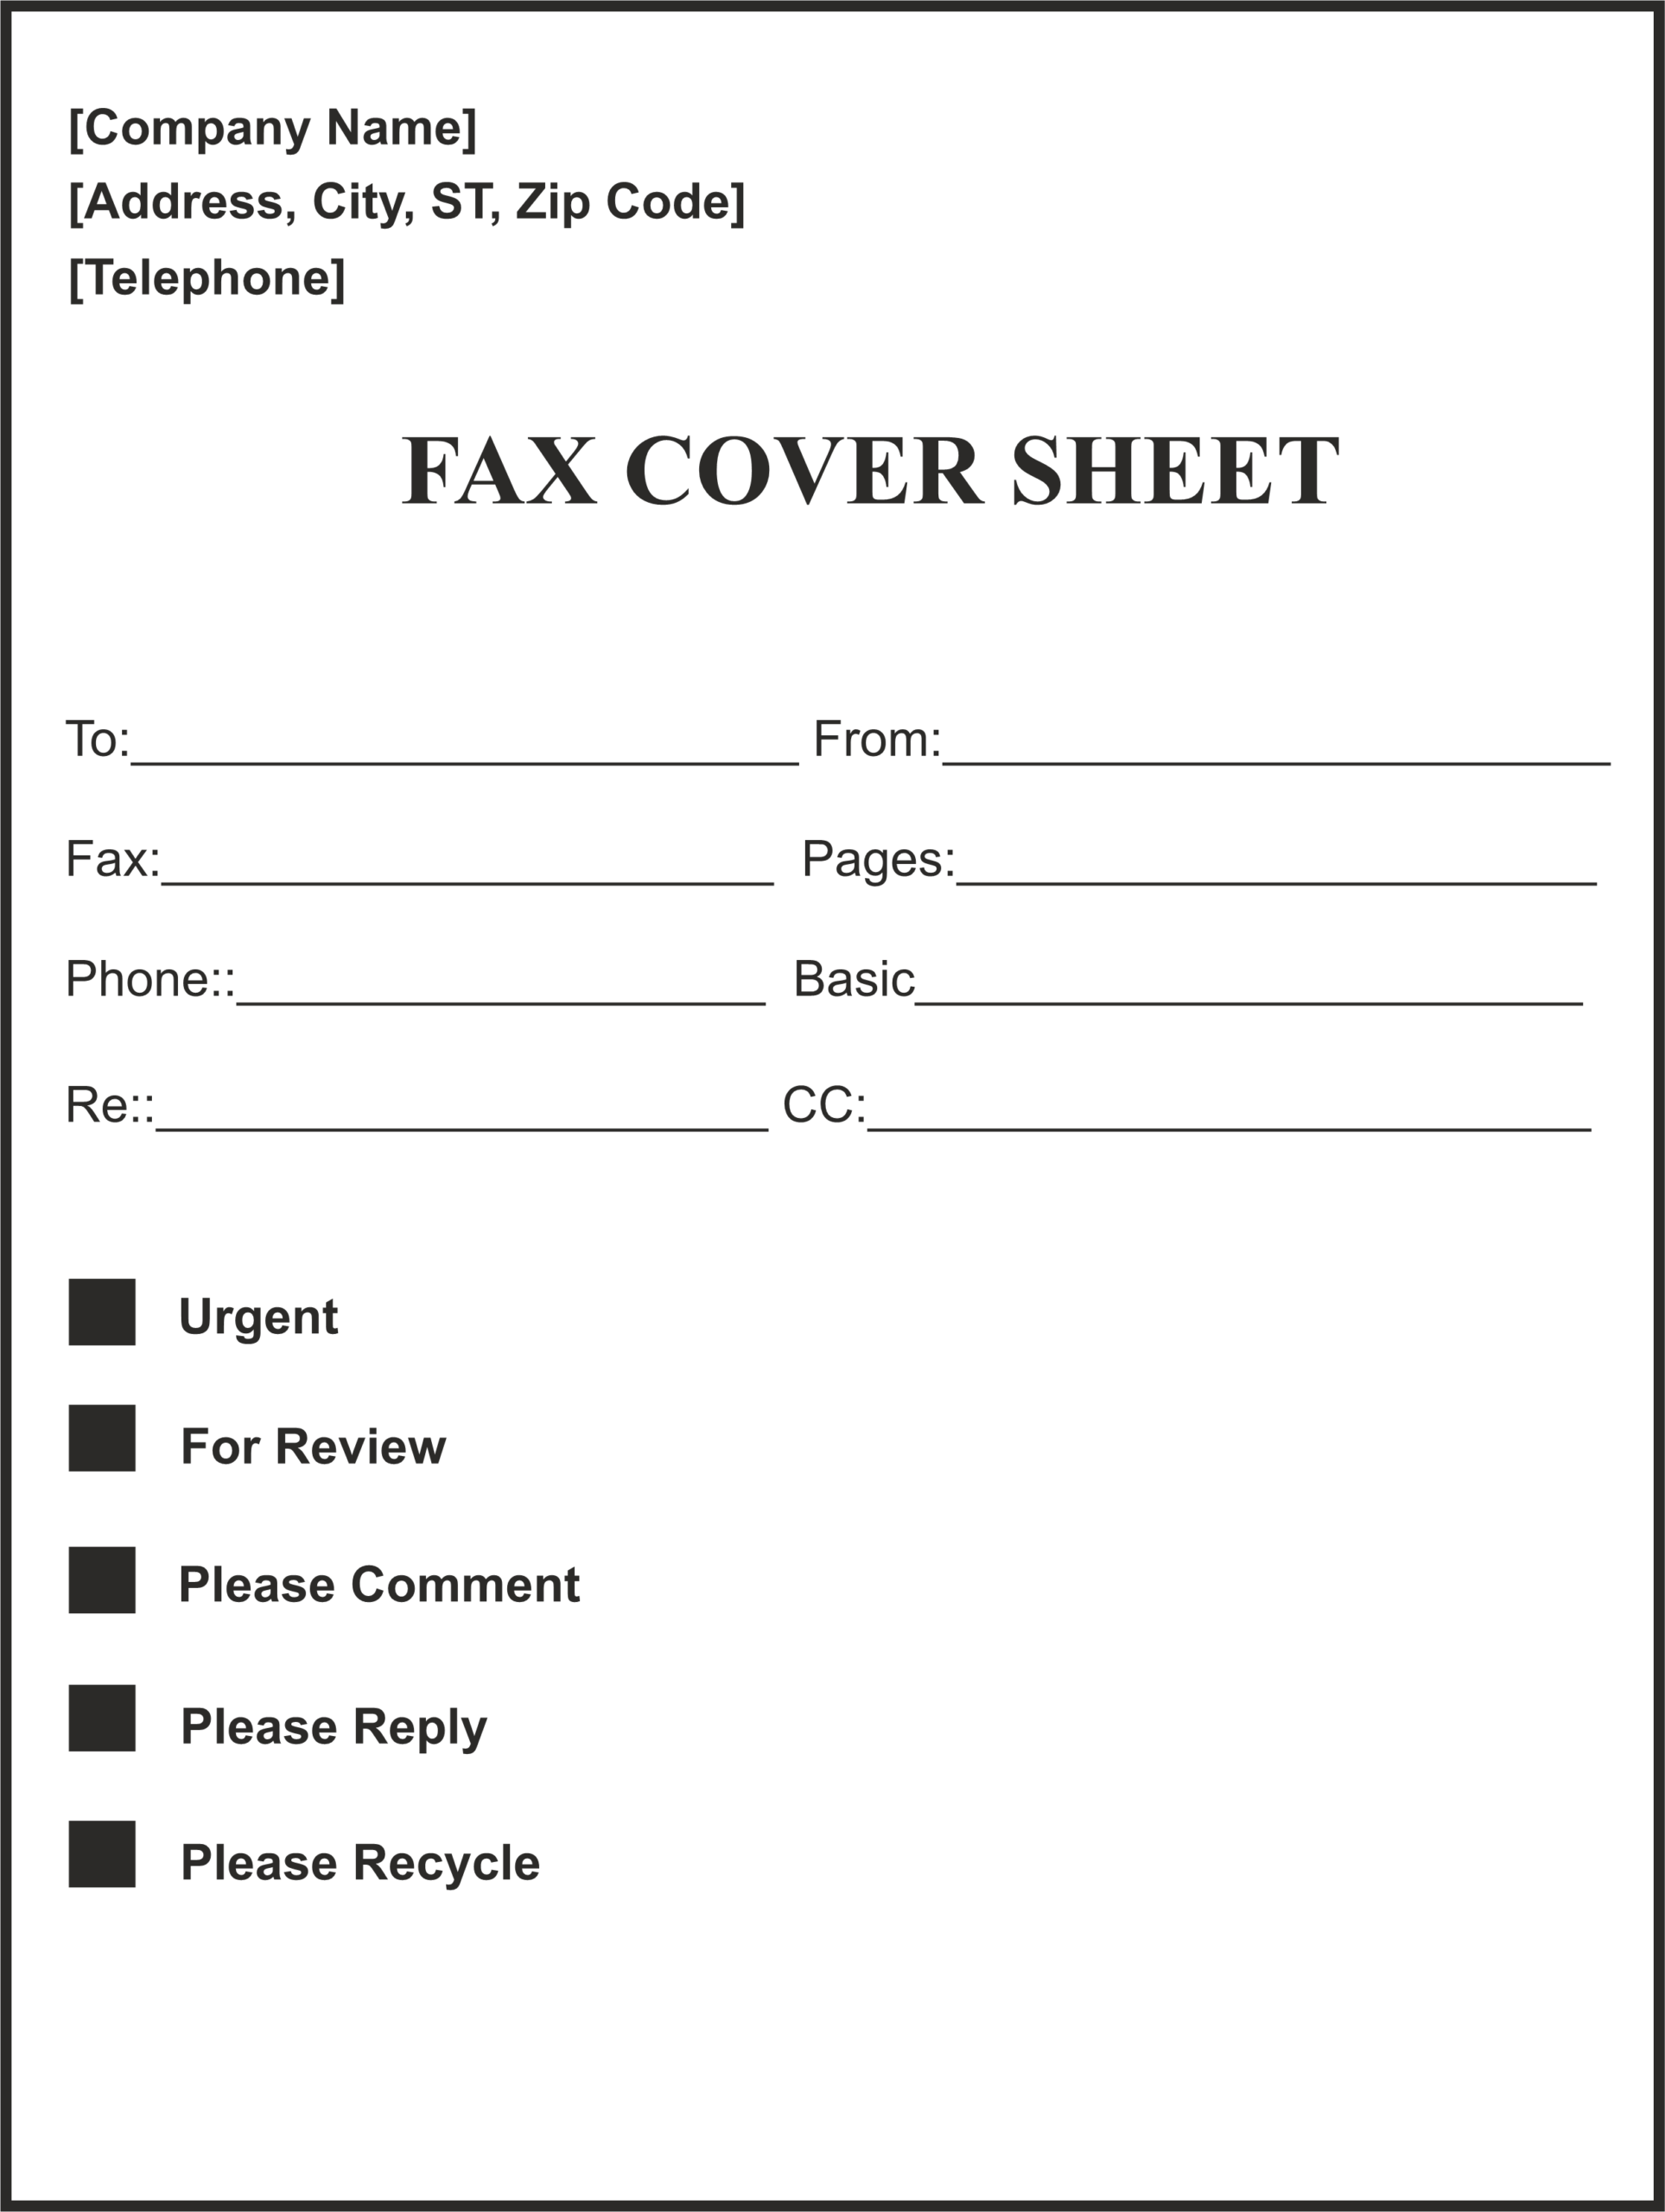 Word Facover Sheets Template Fax Cover Sheet 2013 How To Inside Fax Cover Sheet Template Word 2010